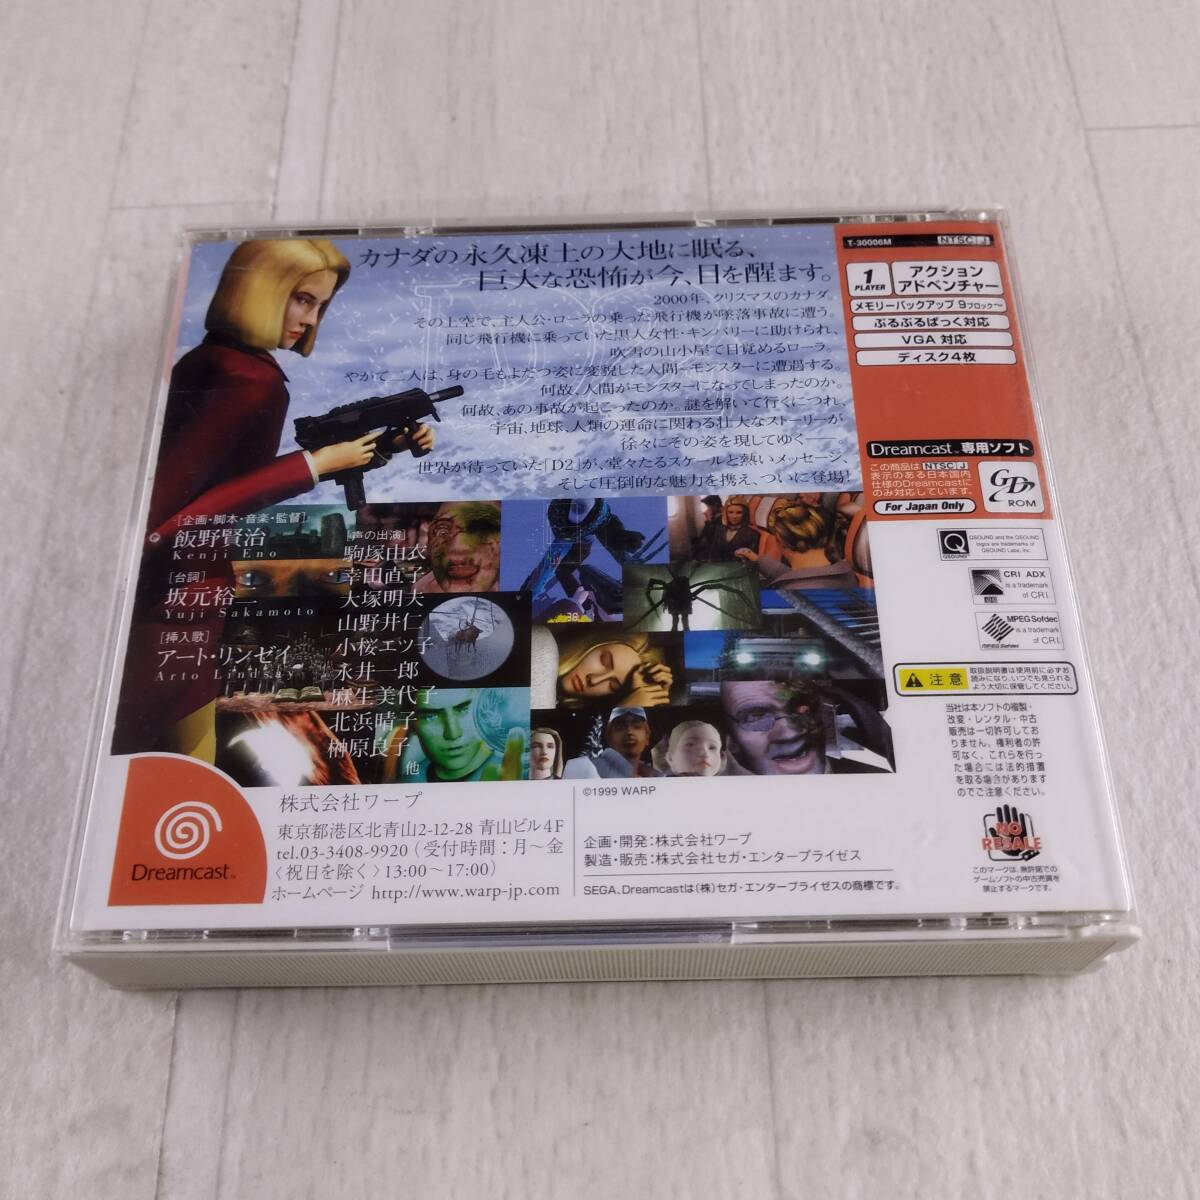 2G5 game soft Dreamcast D. dining table 2